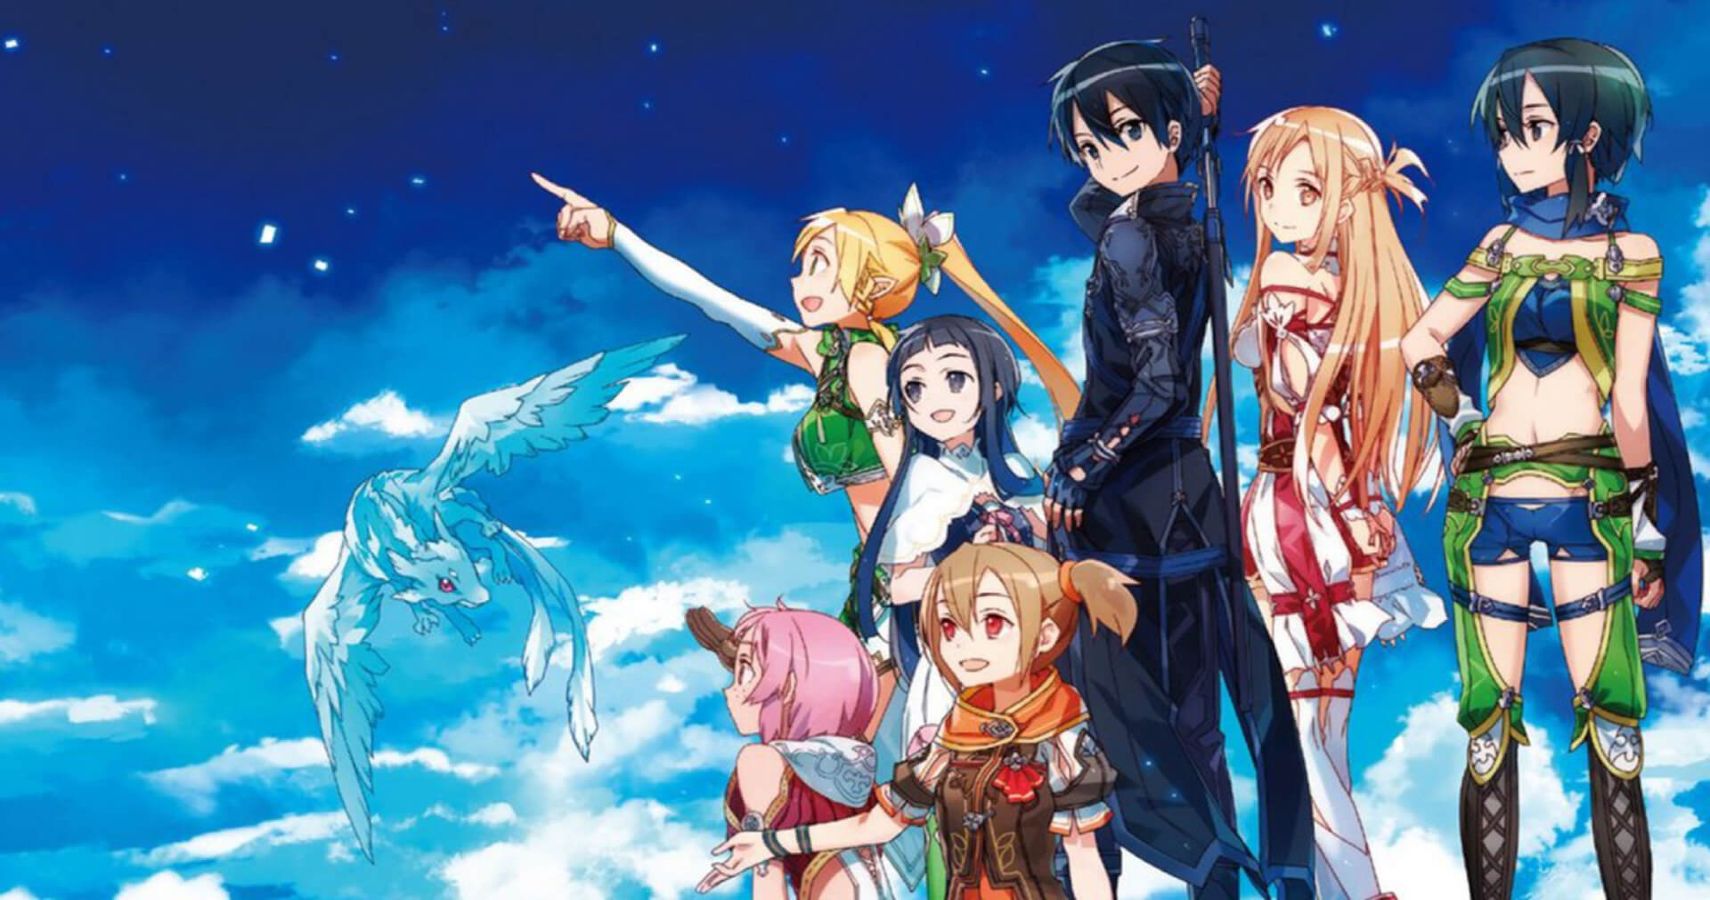 Which Sword Art Online Character Are You Based On Your Zodiac